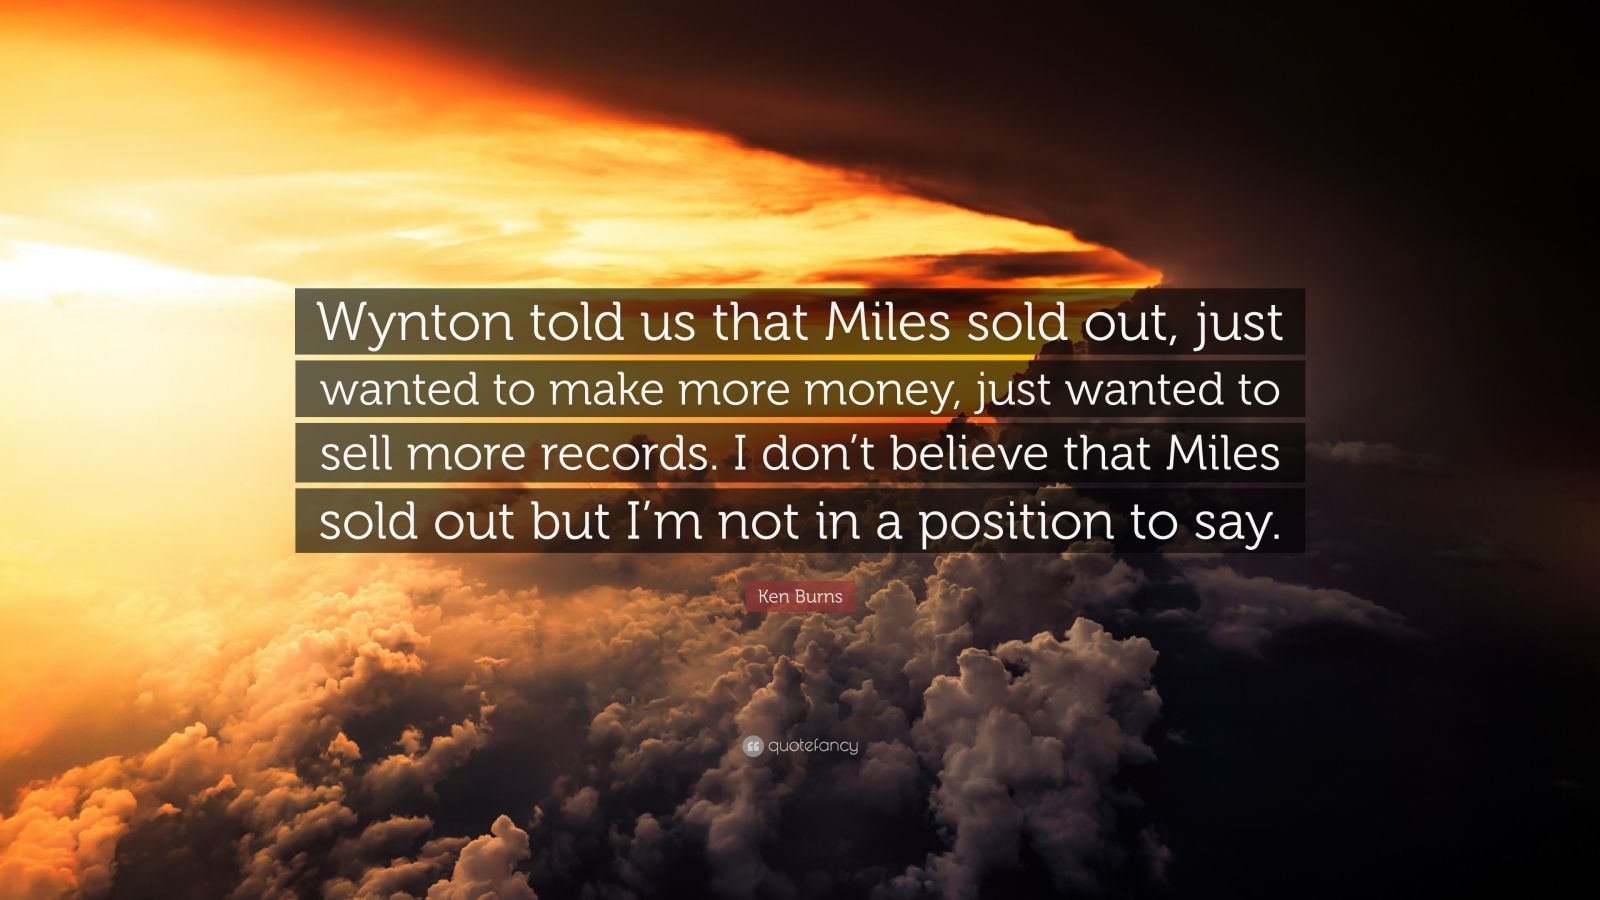 Ken Burns Quote: “Wynton told us that Miles sold out, just wanted